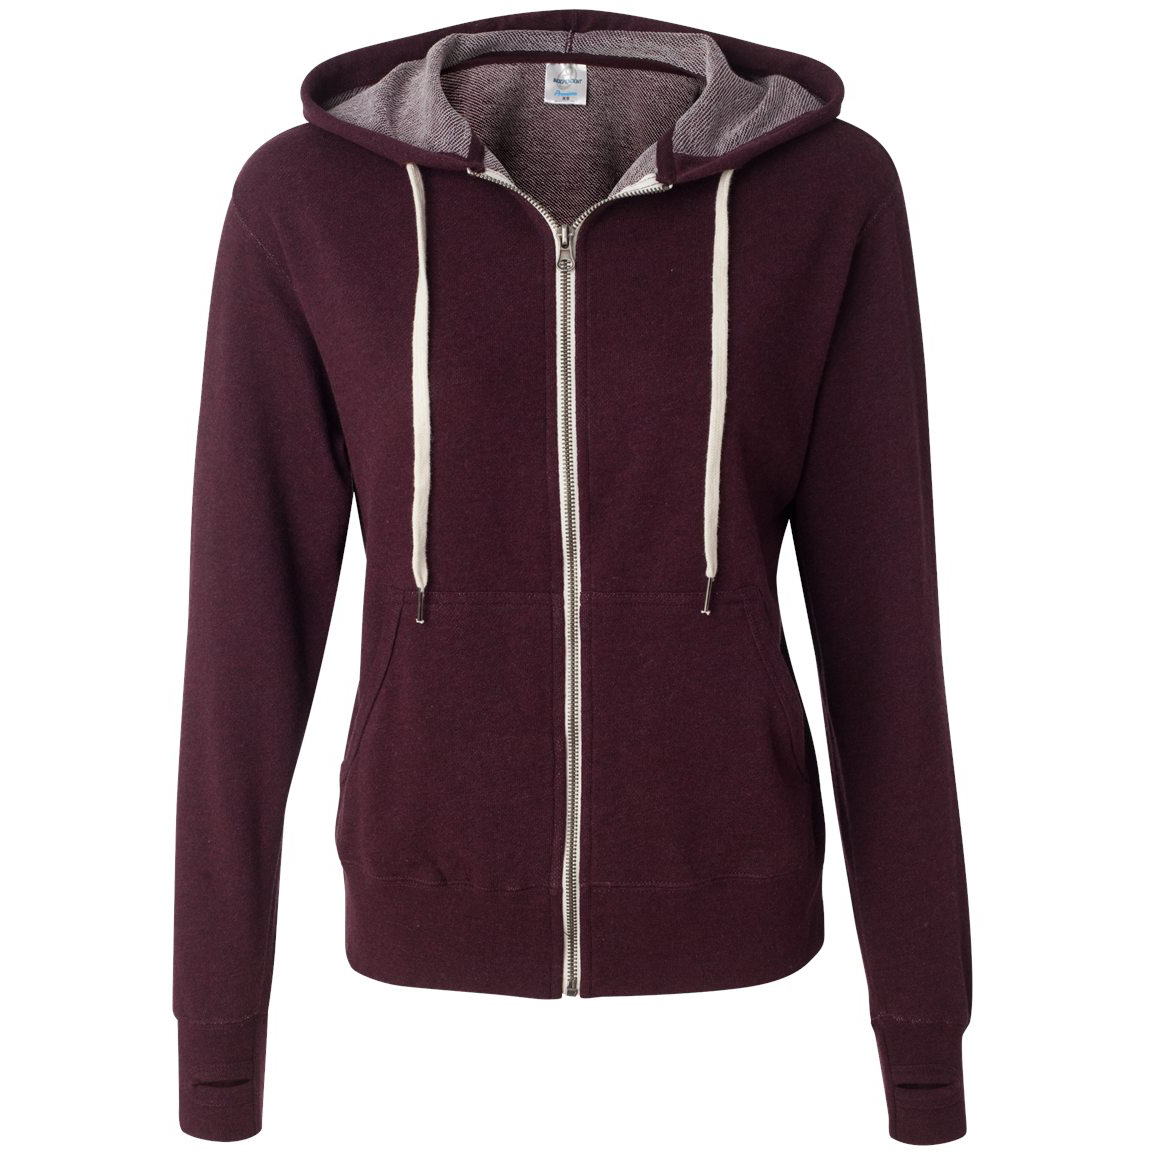 Independent Trading Co. PRM90HTZ Unisex Heathered French Terry Full-Zip ...